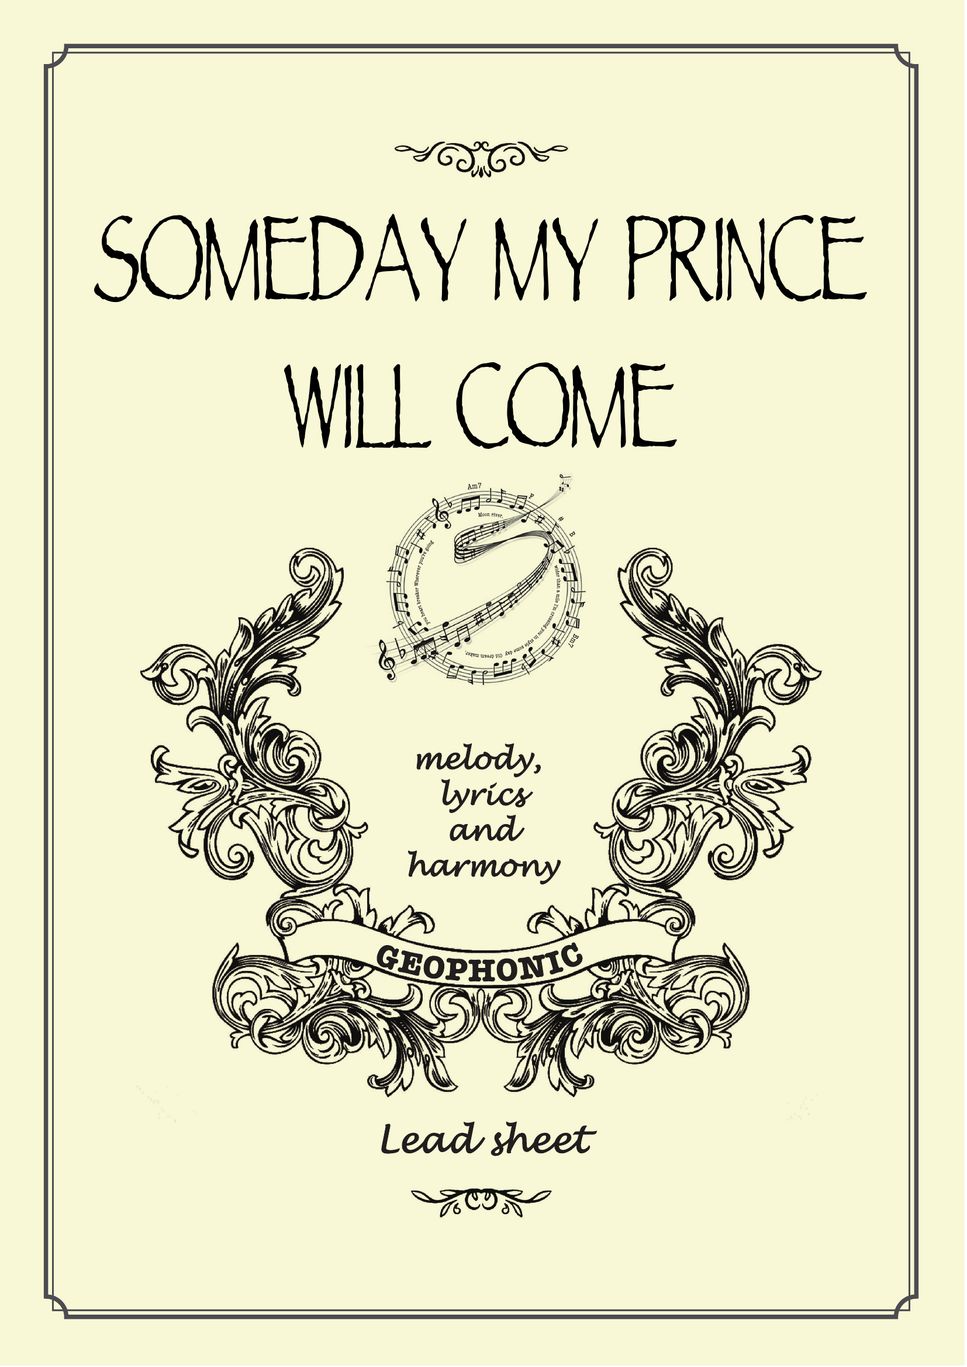 FRANK CHURCHILL - SOMEDAY MY PRINCE WILL COME by GEOPHONIC